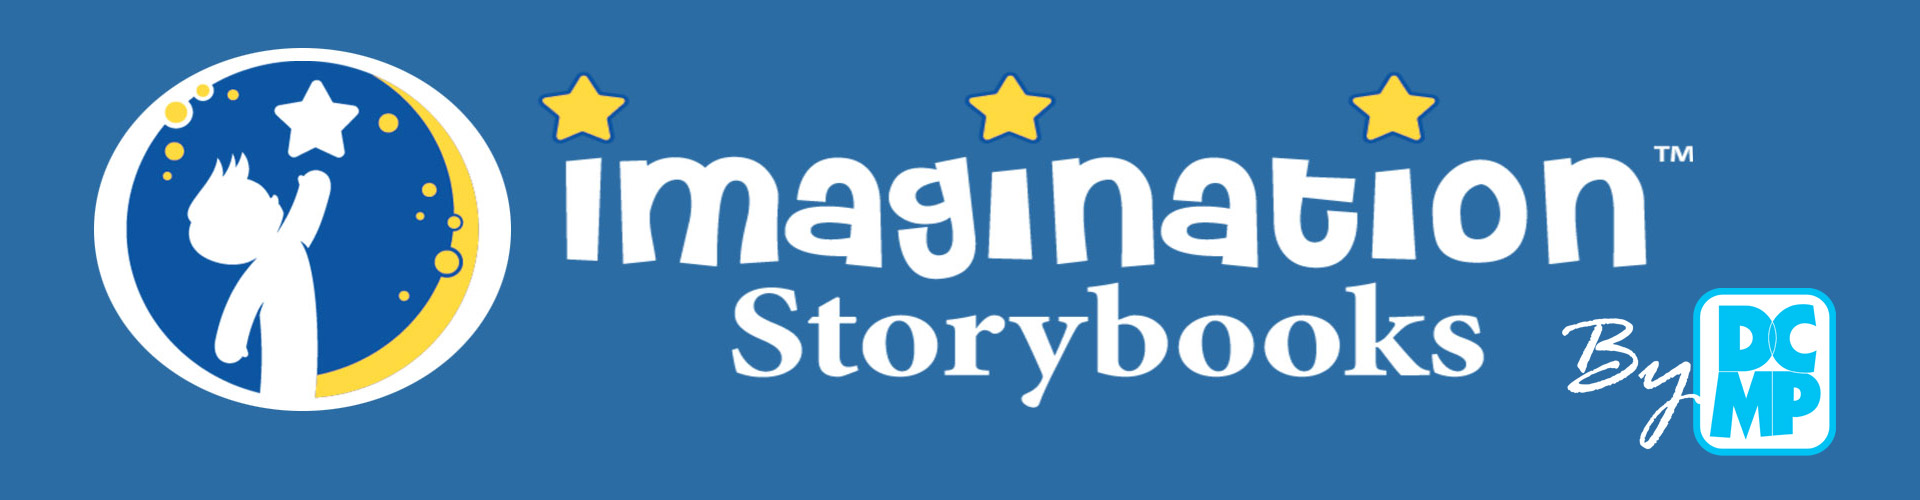 Image for Imagination Storybooks by DCMP